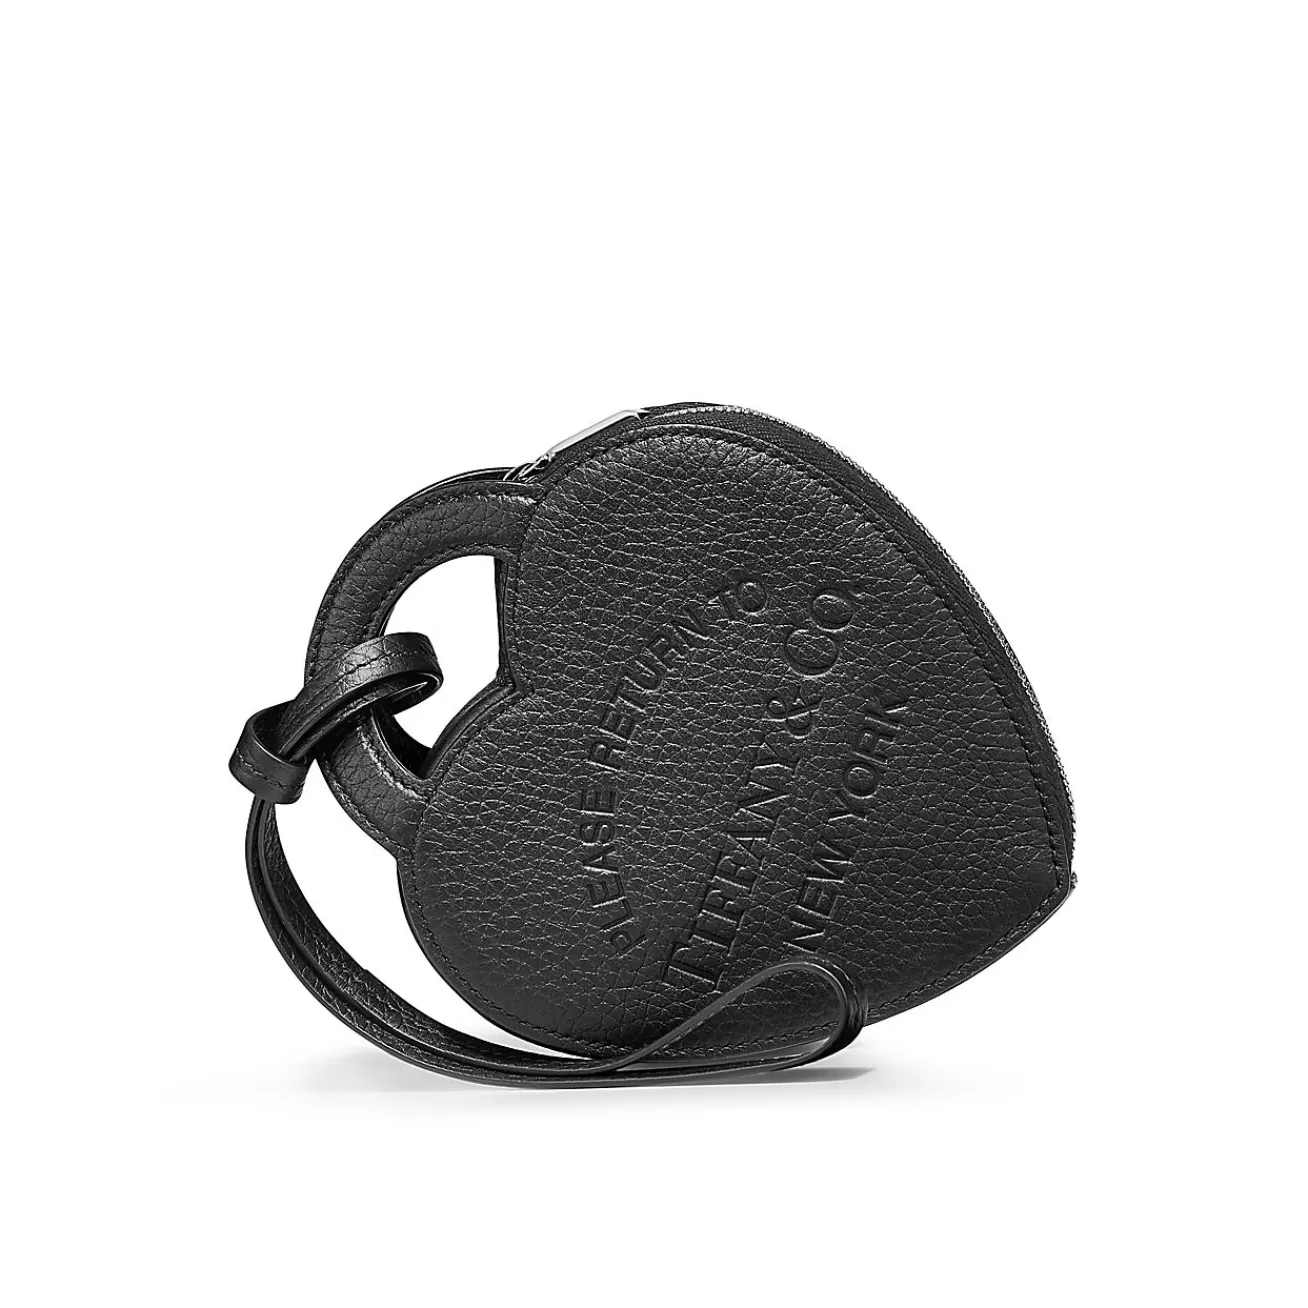 Tiffany & Co. Return to Tiffany® Coin Case in Black Leather | ^Women Small Leather Goods | Women's Accessories